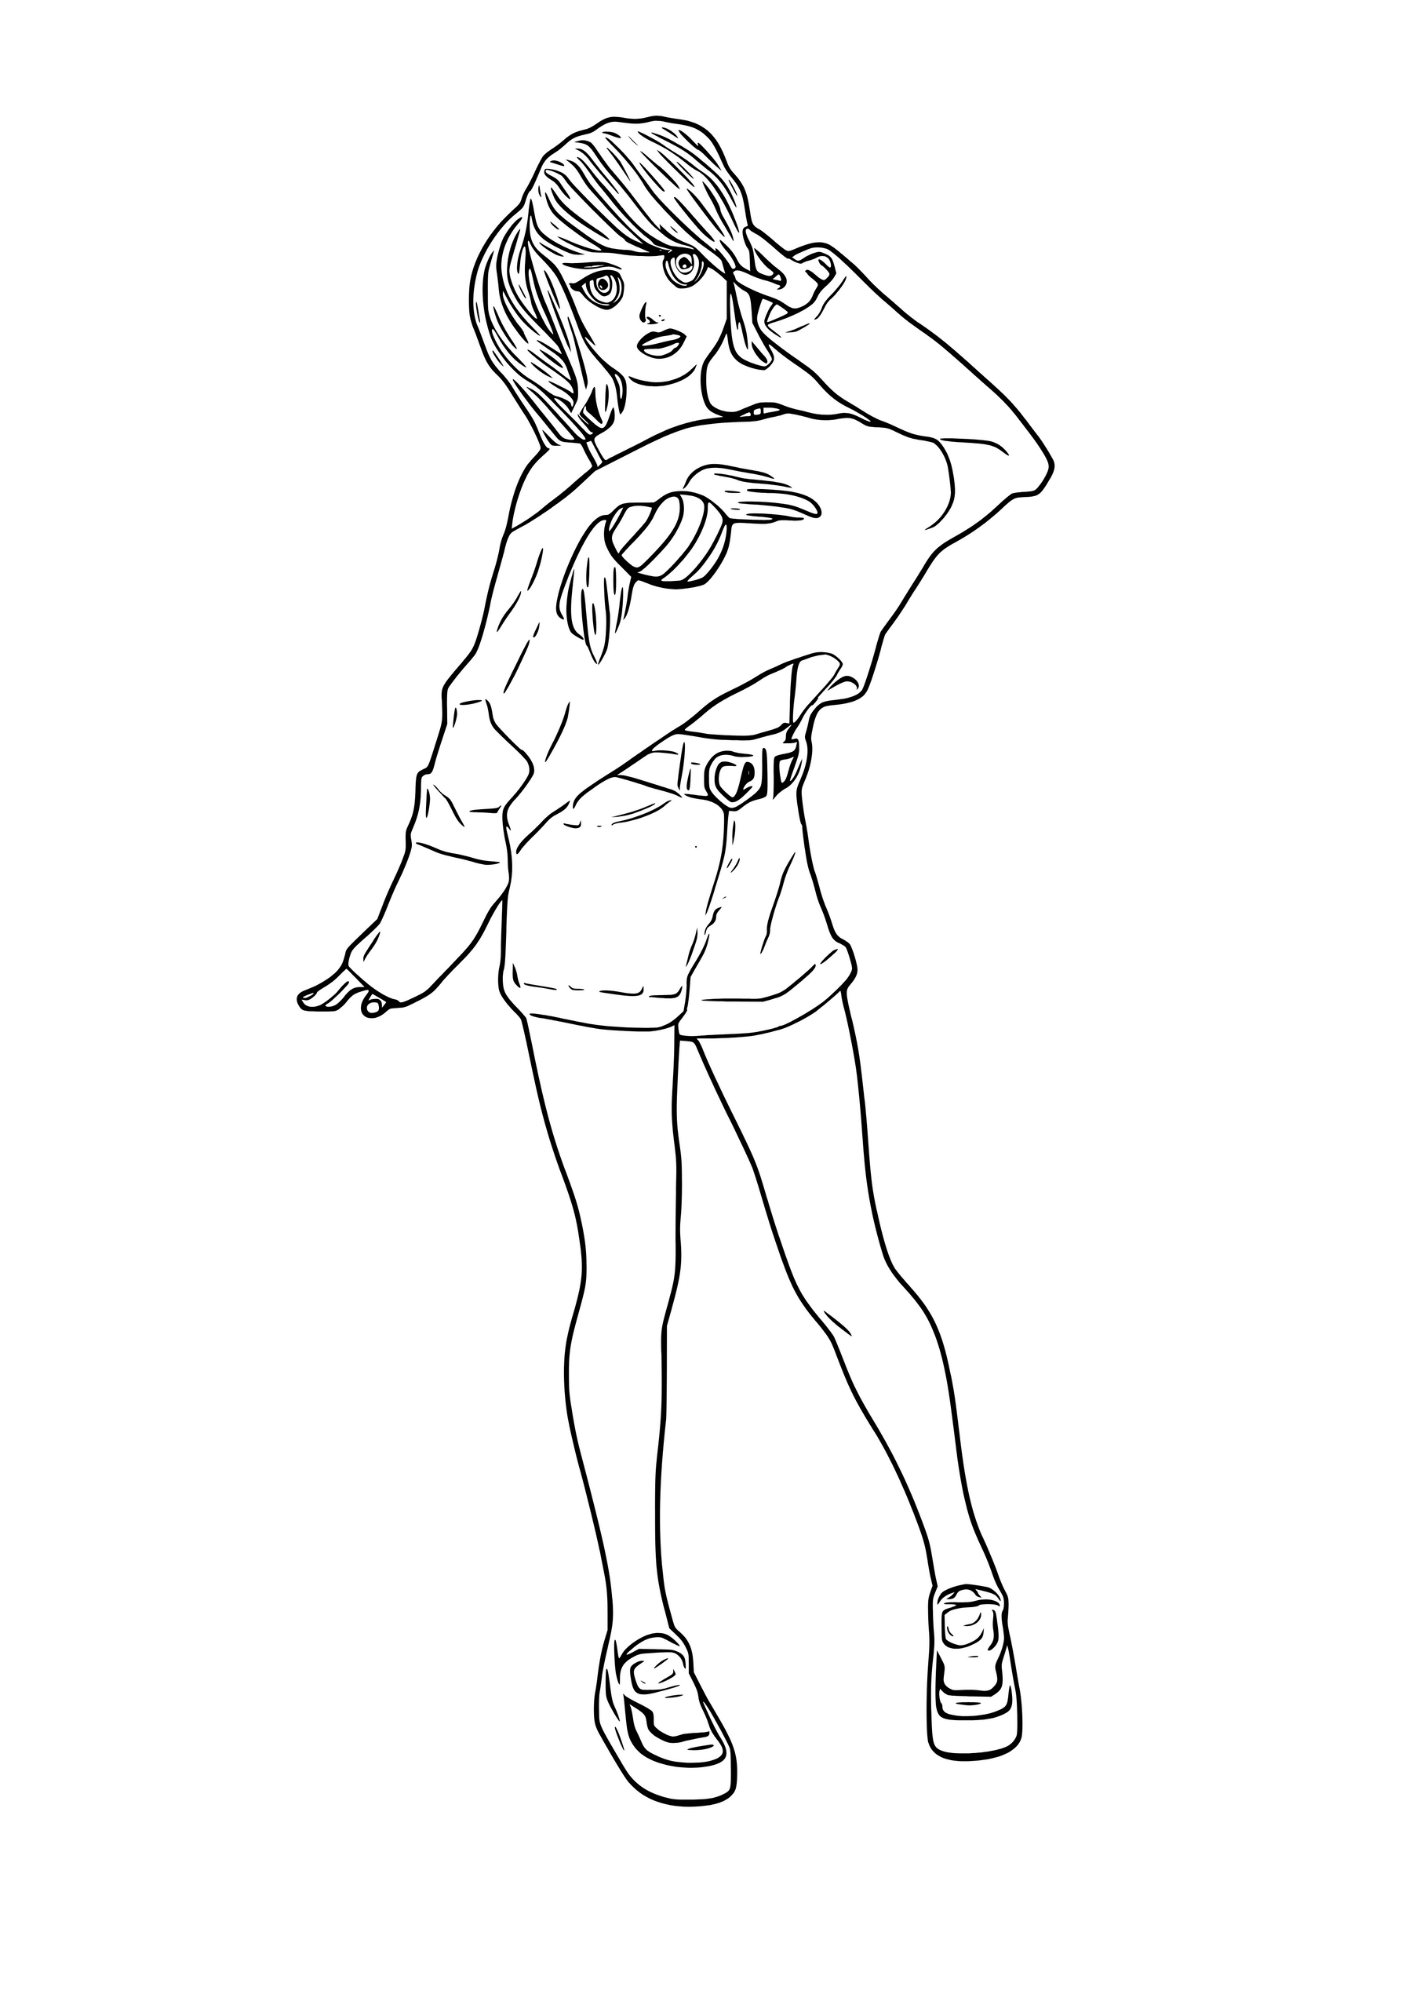 Trendy girl in sweatshirt and shorts coloring page